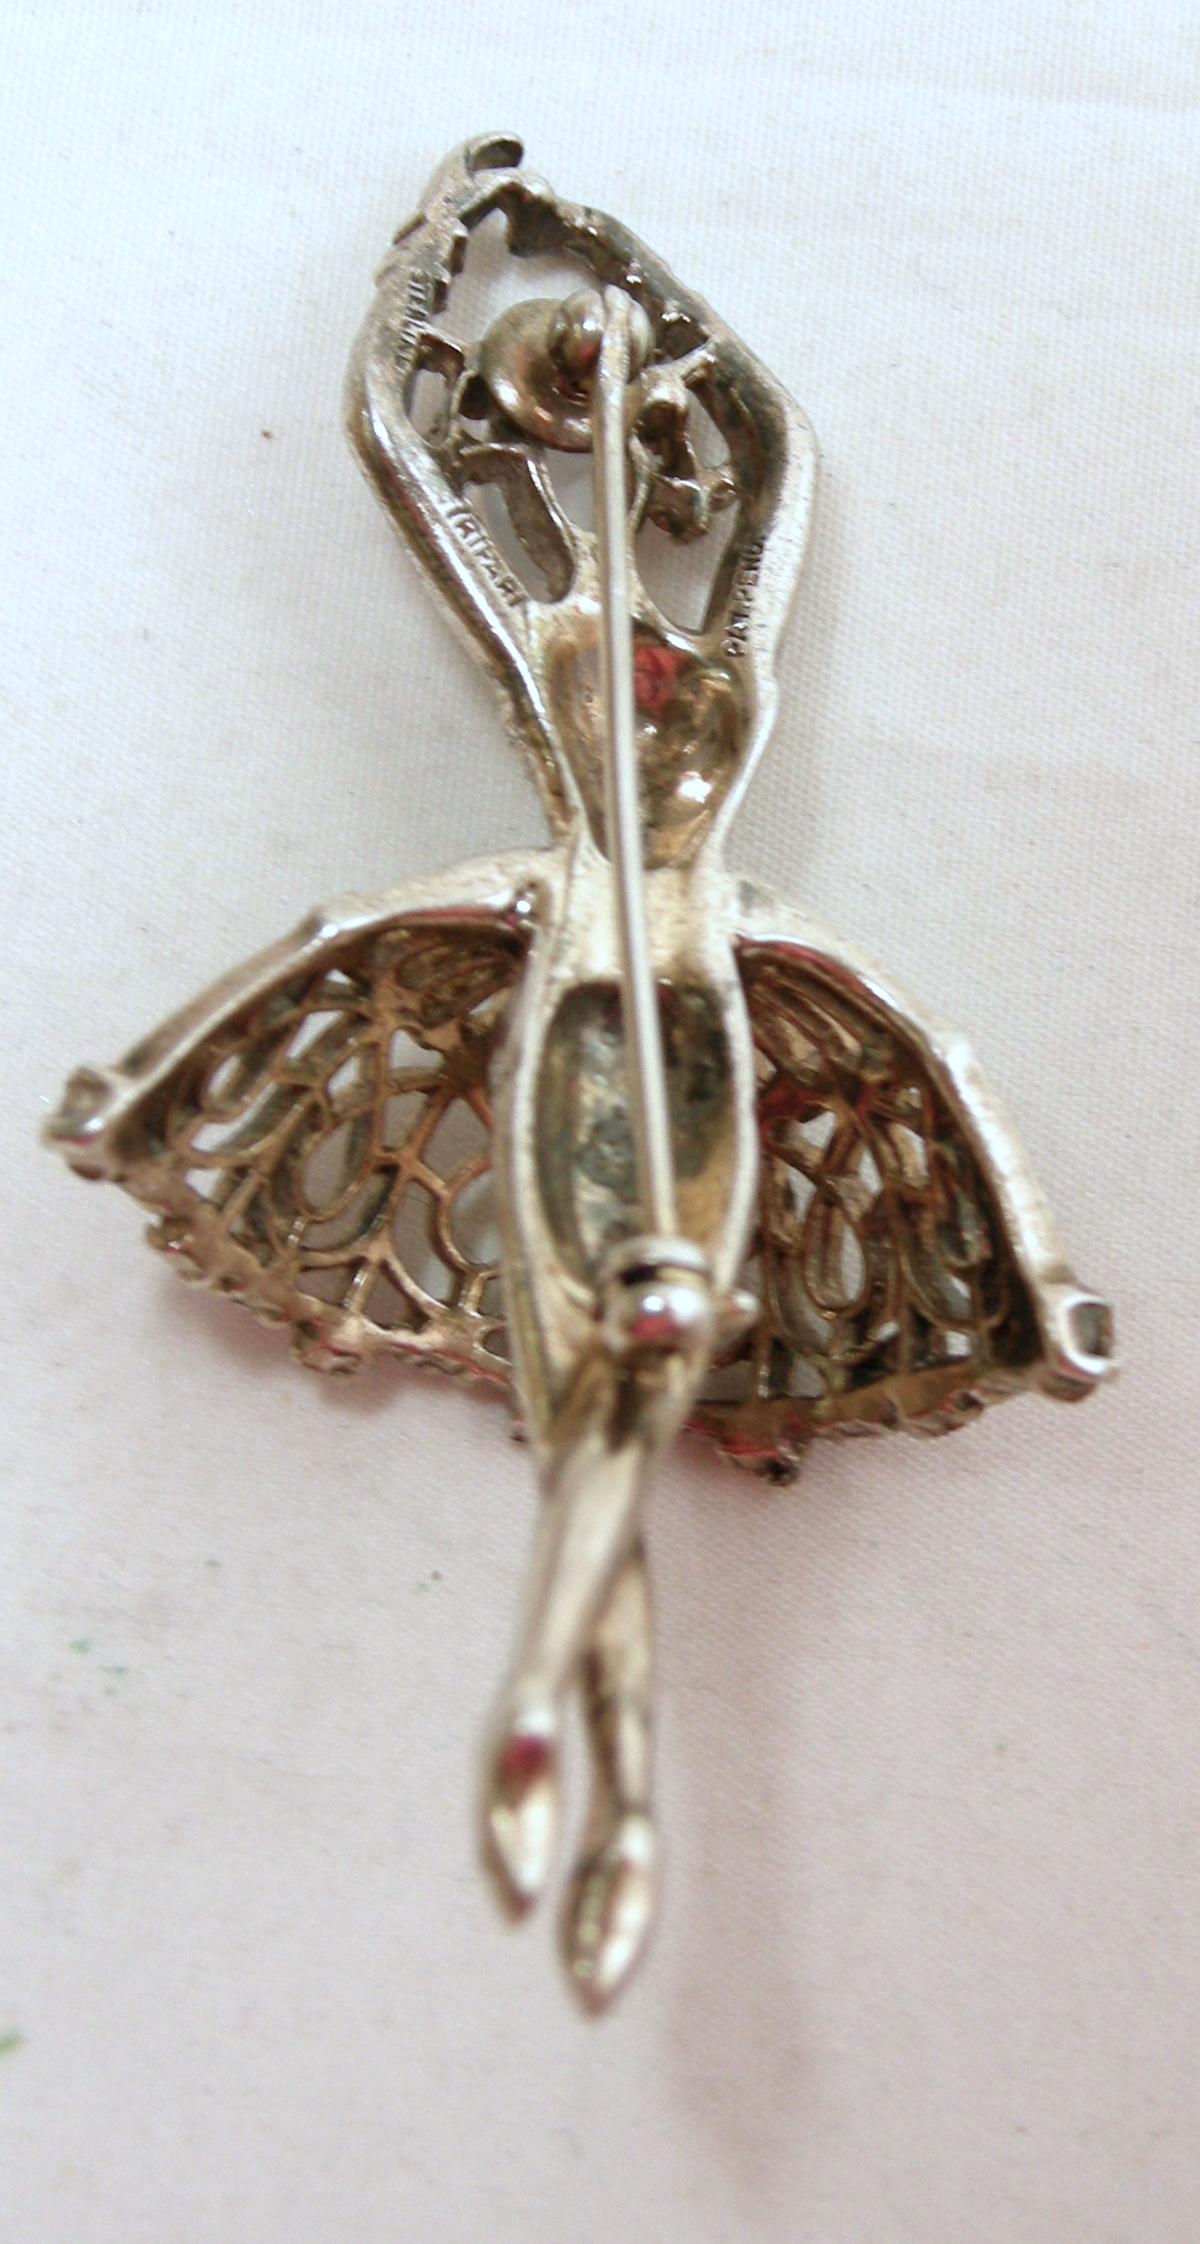 This is the famous Trifari Ballerina brooch made in the 1940s.  Her face is a faux moonstone and she’s wearing a sterling silver gold vermeil ballerina tutu with red and clear crystals.  In excellent condition, this brooch measures 2-1/2” x 1-1/4”